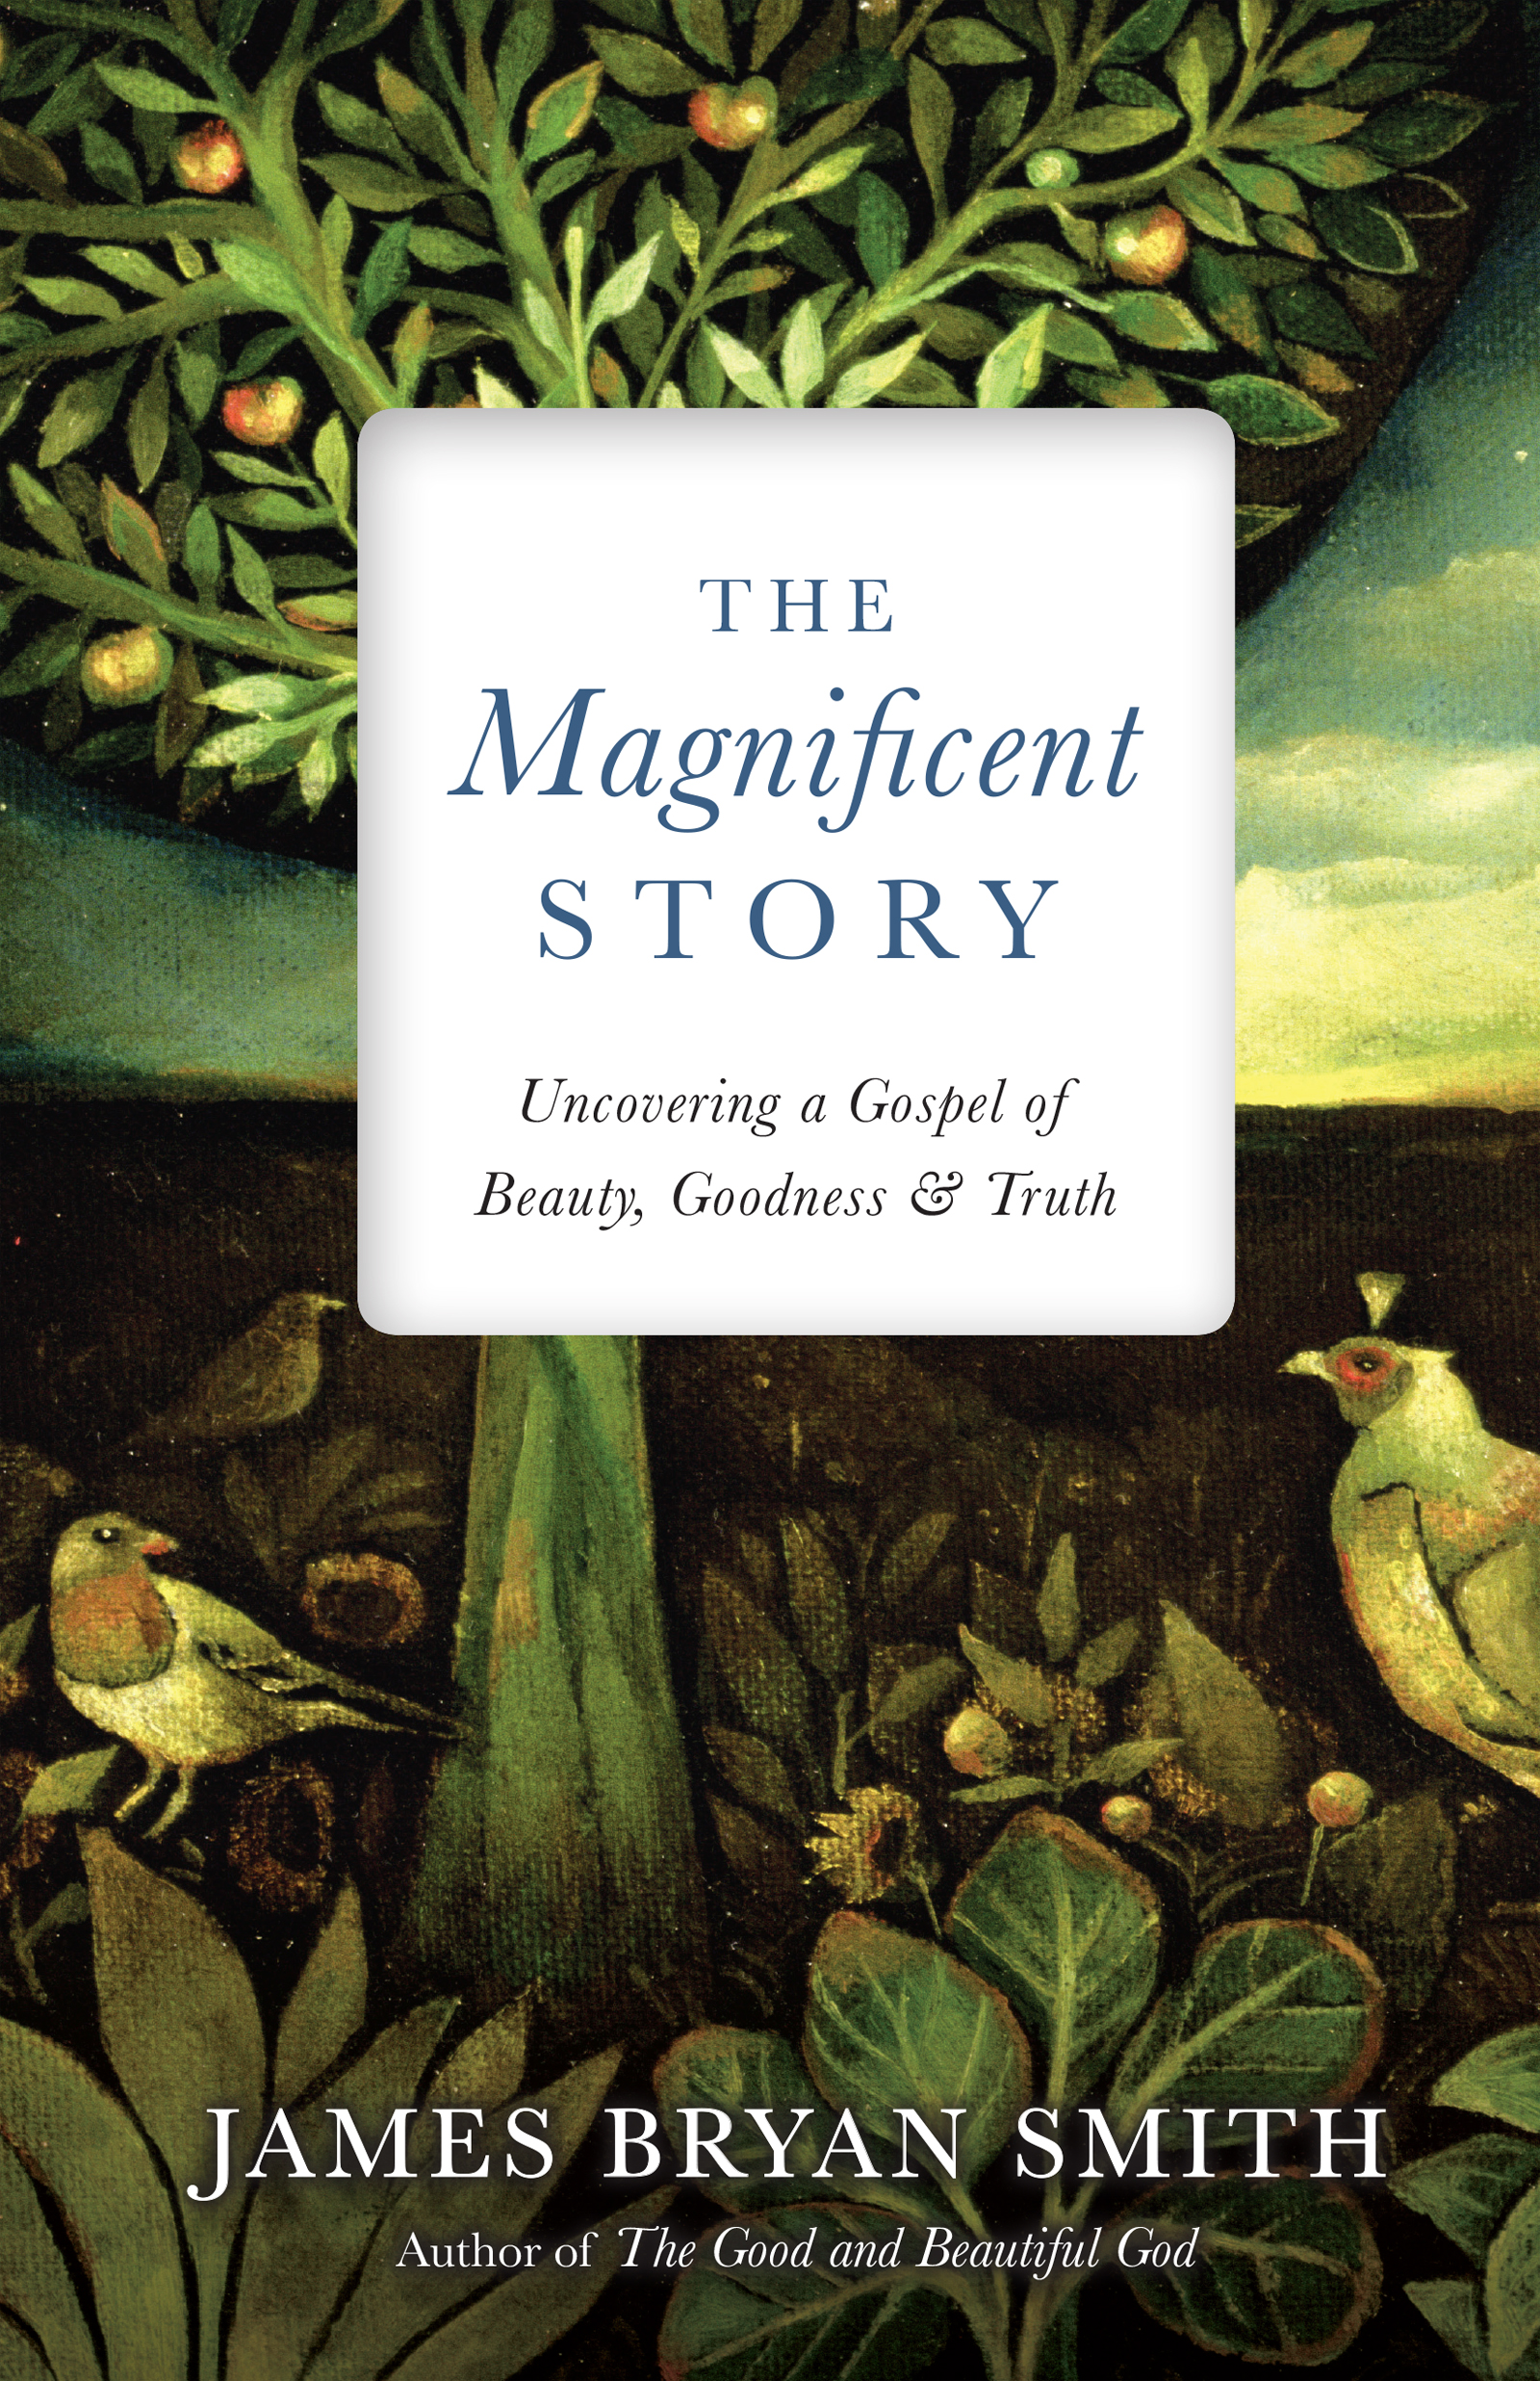 This image is the cover for the book The Magnificent Story, Apprentice Resources